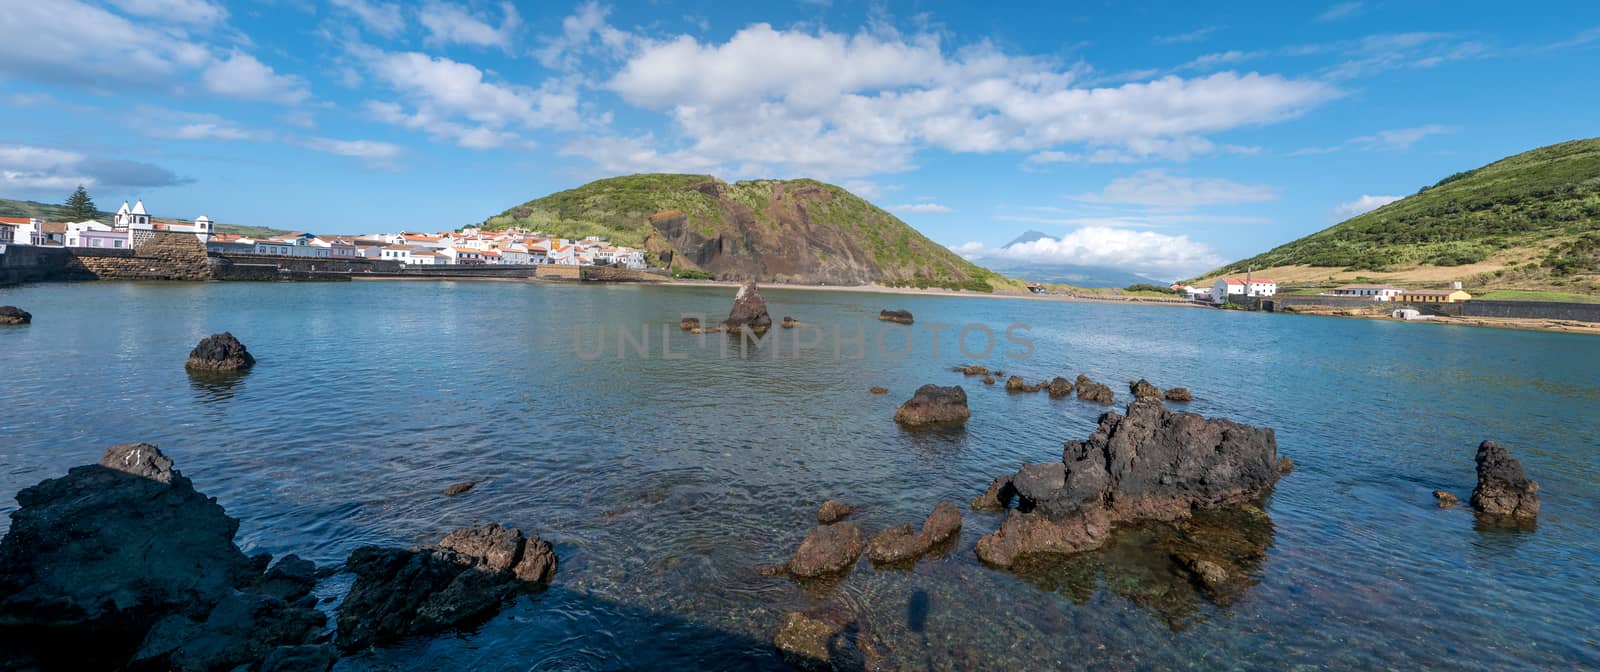 Walk on the Azores archipelago. Discovery of the island of Faial, Azores. Portugal. Europe